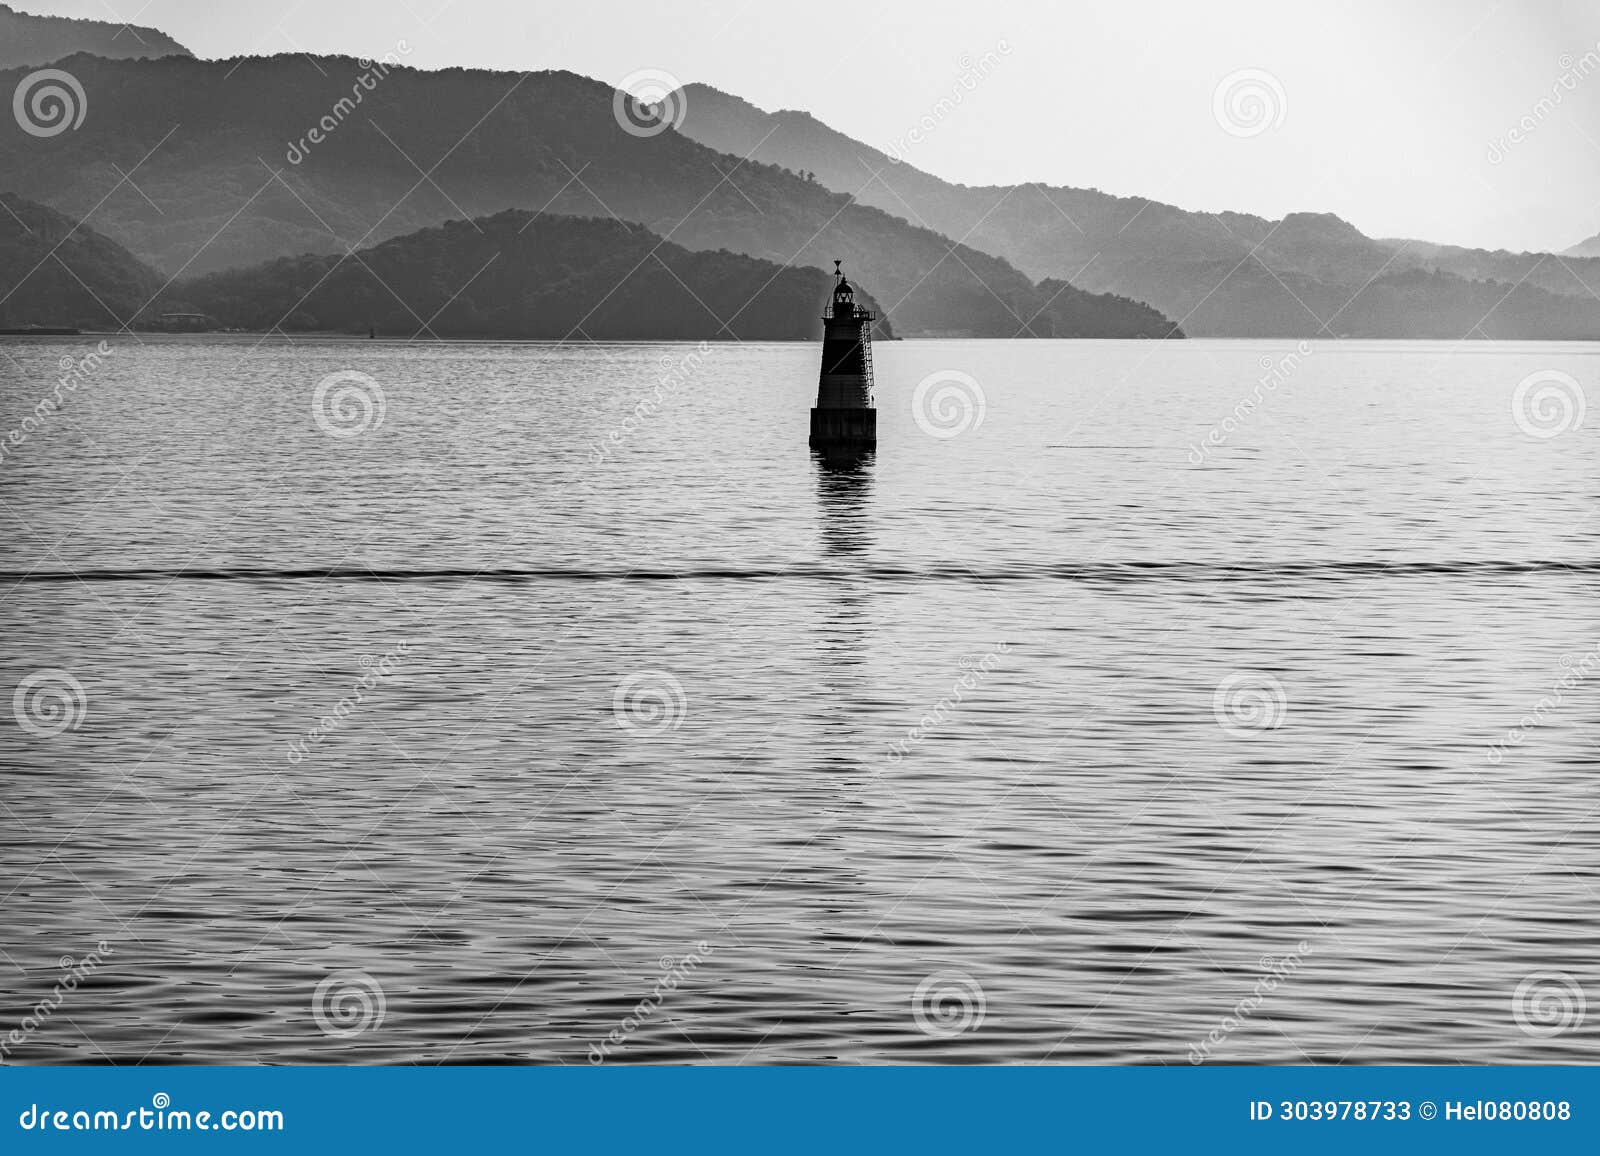 small lighthouse on japanese seto inland sea with foggy mountains in background. black and white photo